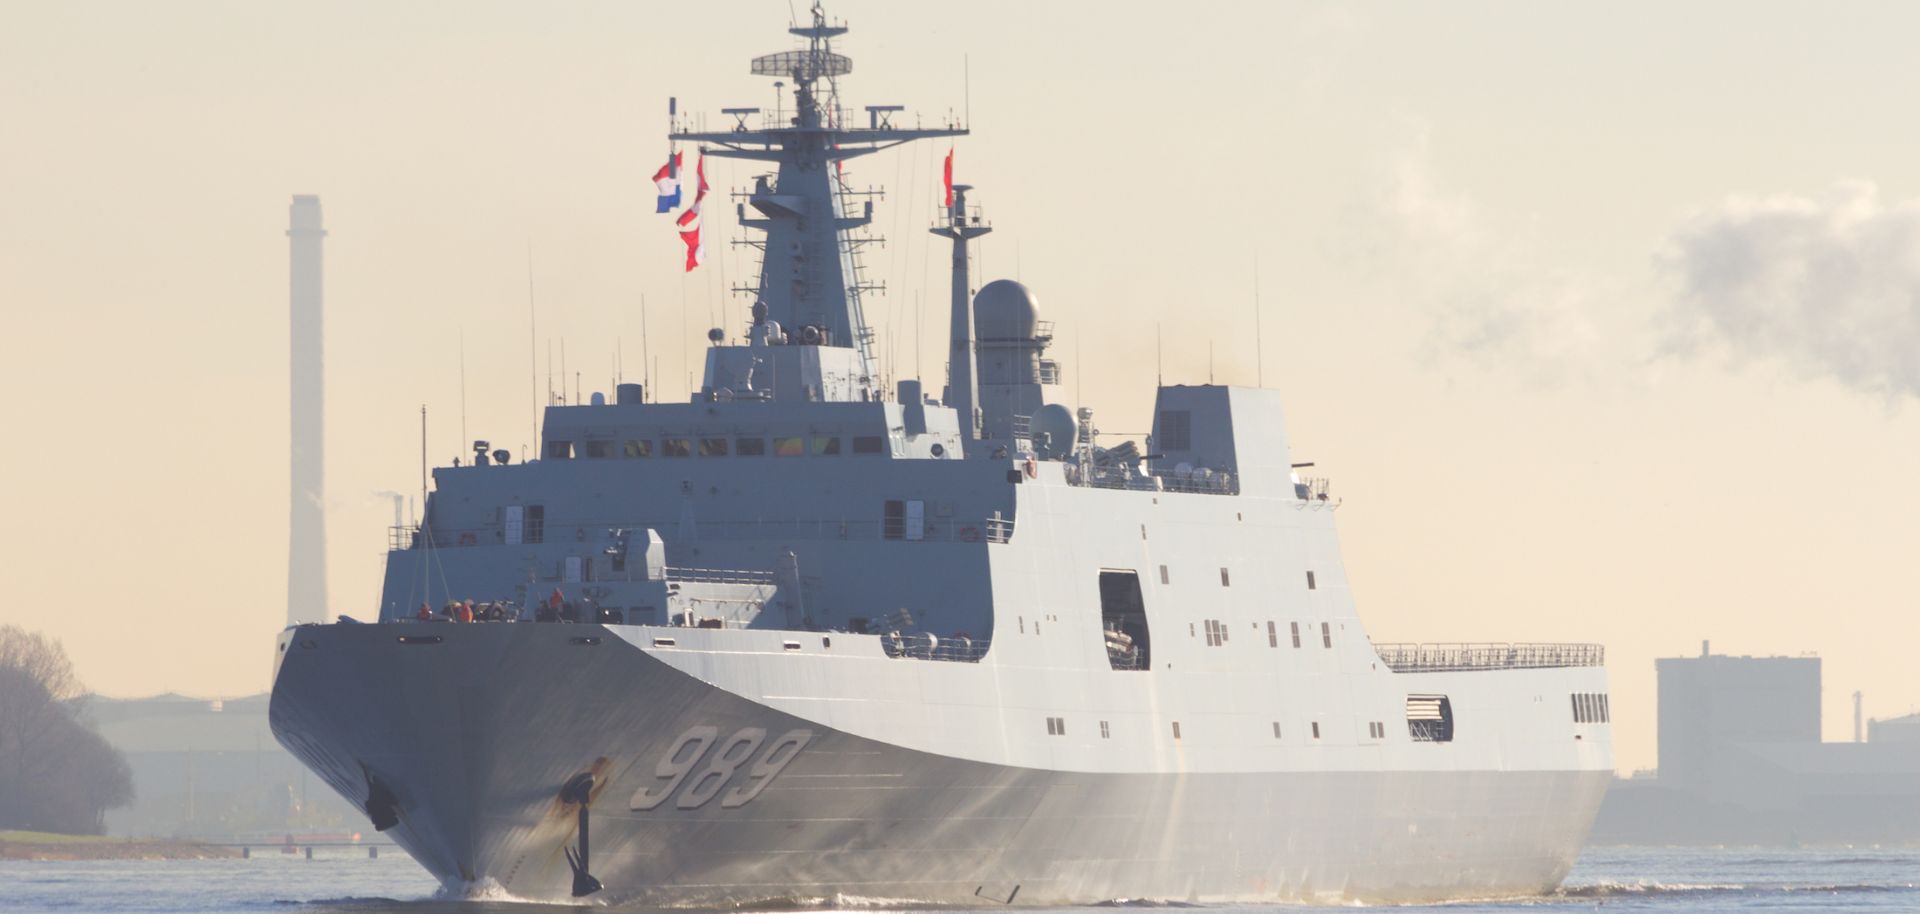 This image shows the Chinese naval ship Changbai Shan, an amphibious transport dock